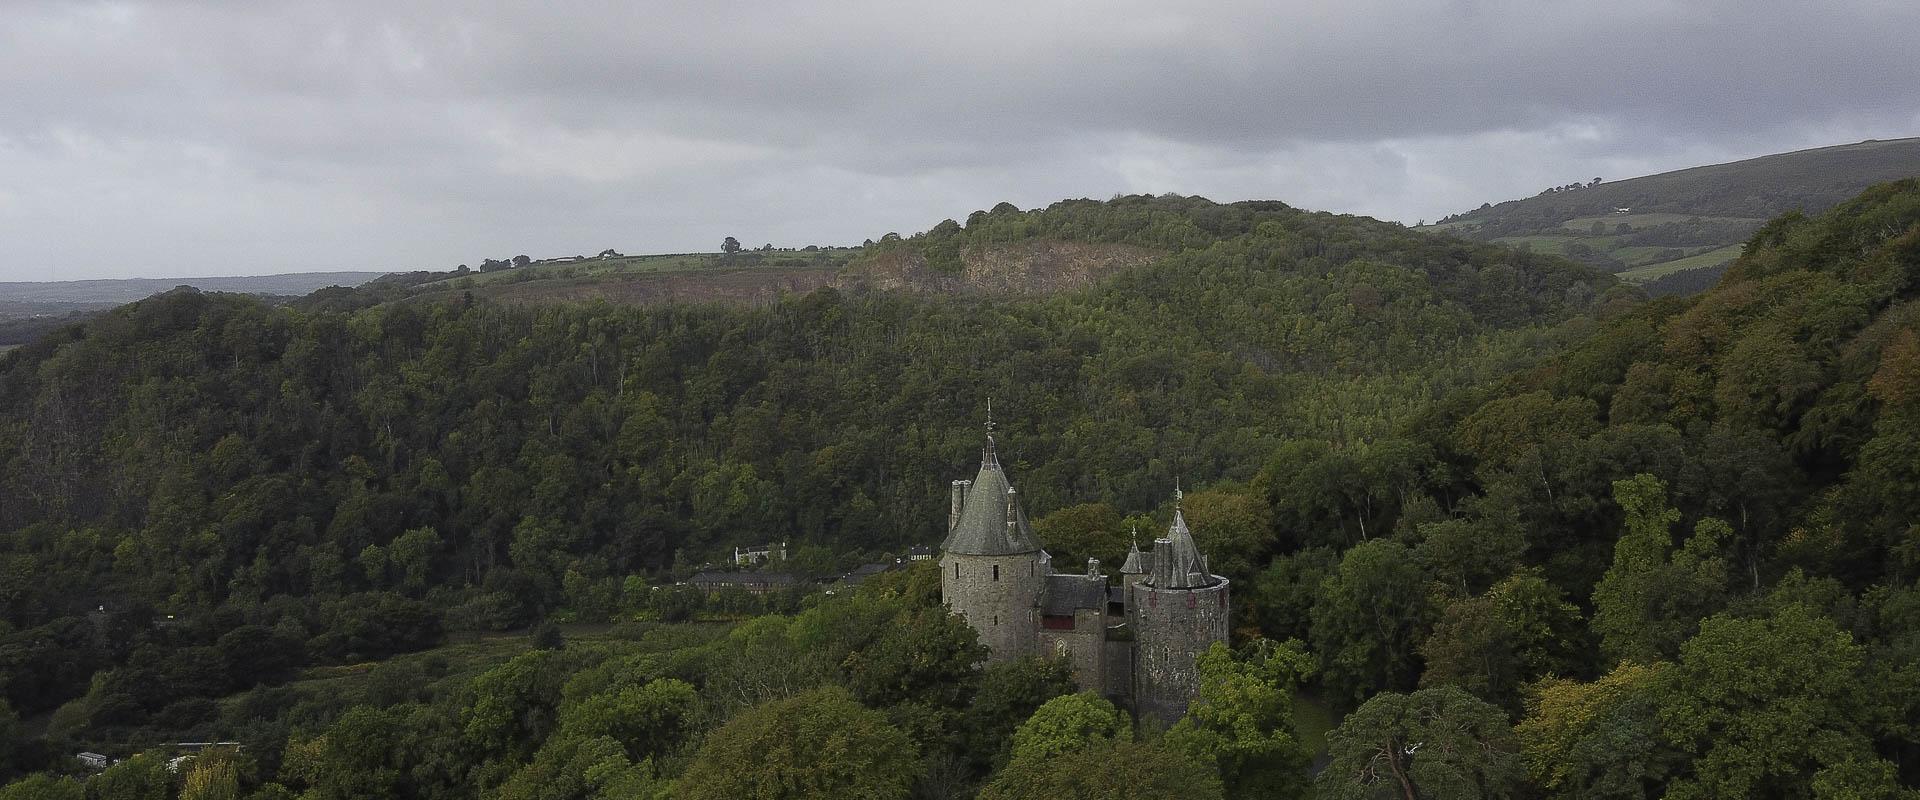 Castell Coch o'r awyr/Castell Coch from the air